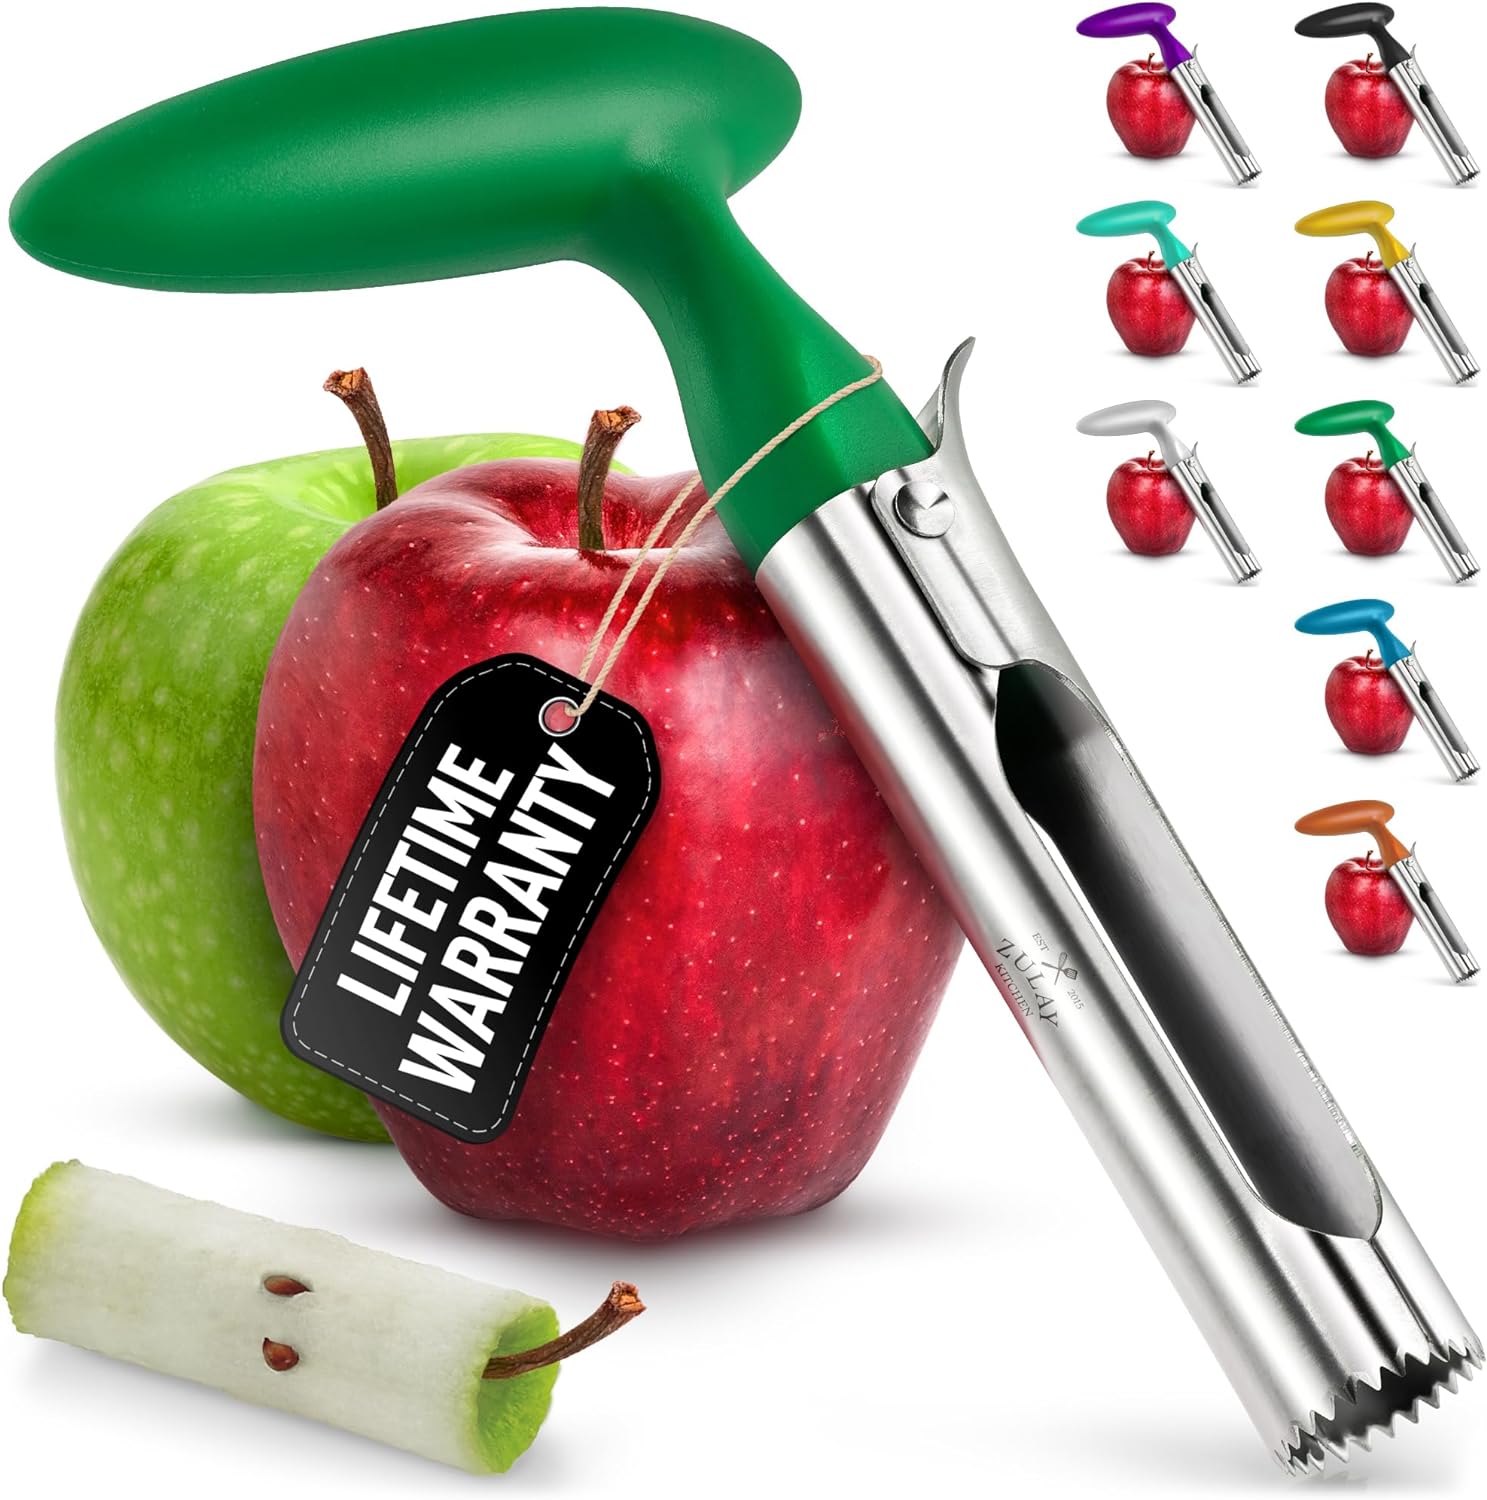 Zulay Kitchen Apple Corer Slicer - Apple Corer Tool Remover Stainless Steel Cupcake Corer, Green - image 1 of 9